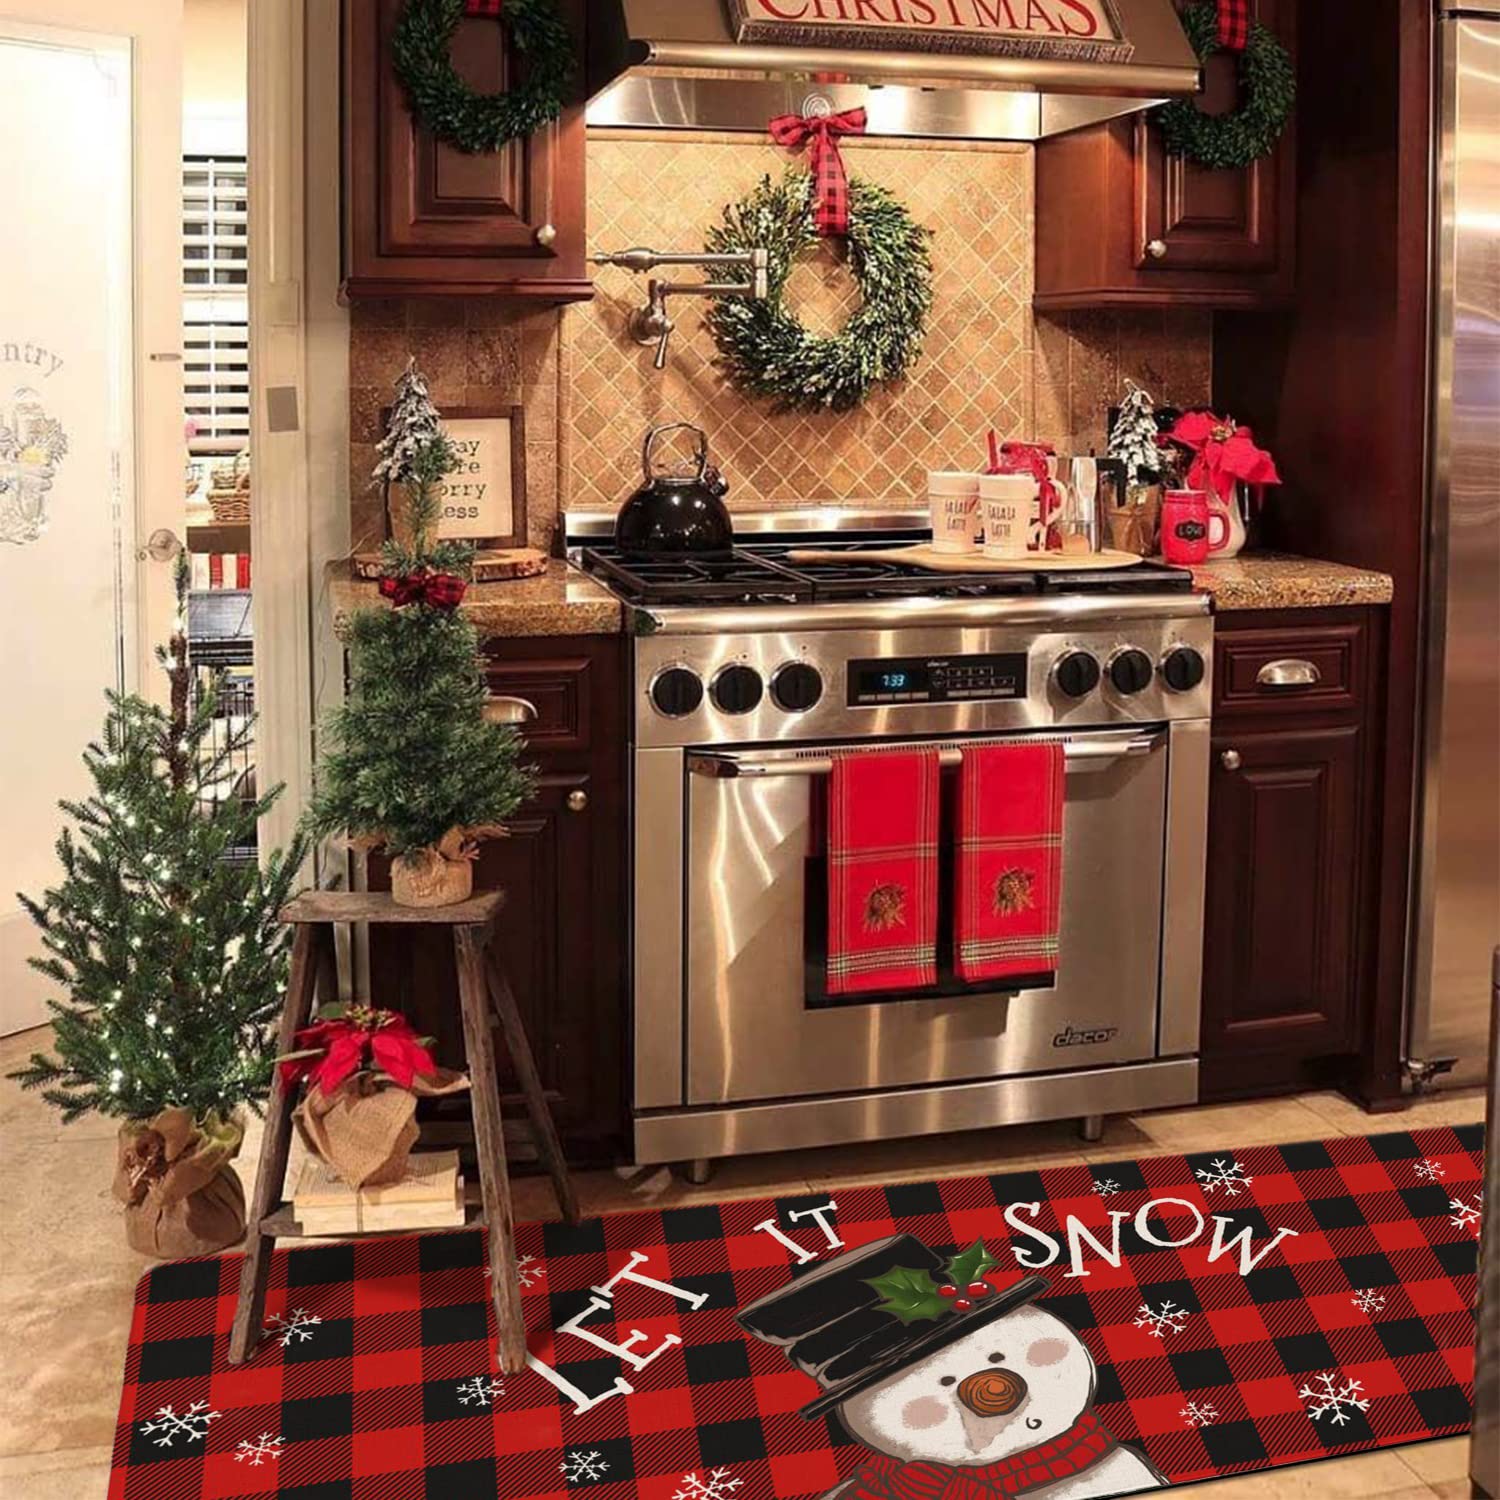 Buffalo Plaid Snowman Christmas Kitchen Rugs and Mats Set 2 Piece for Floor